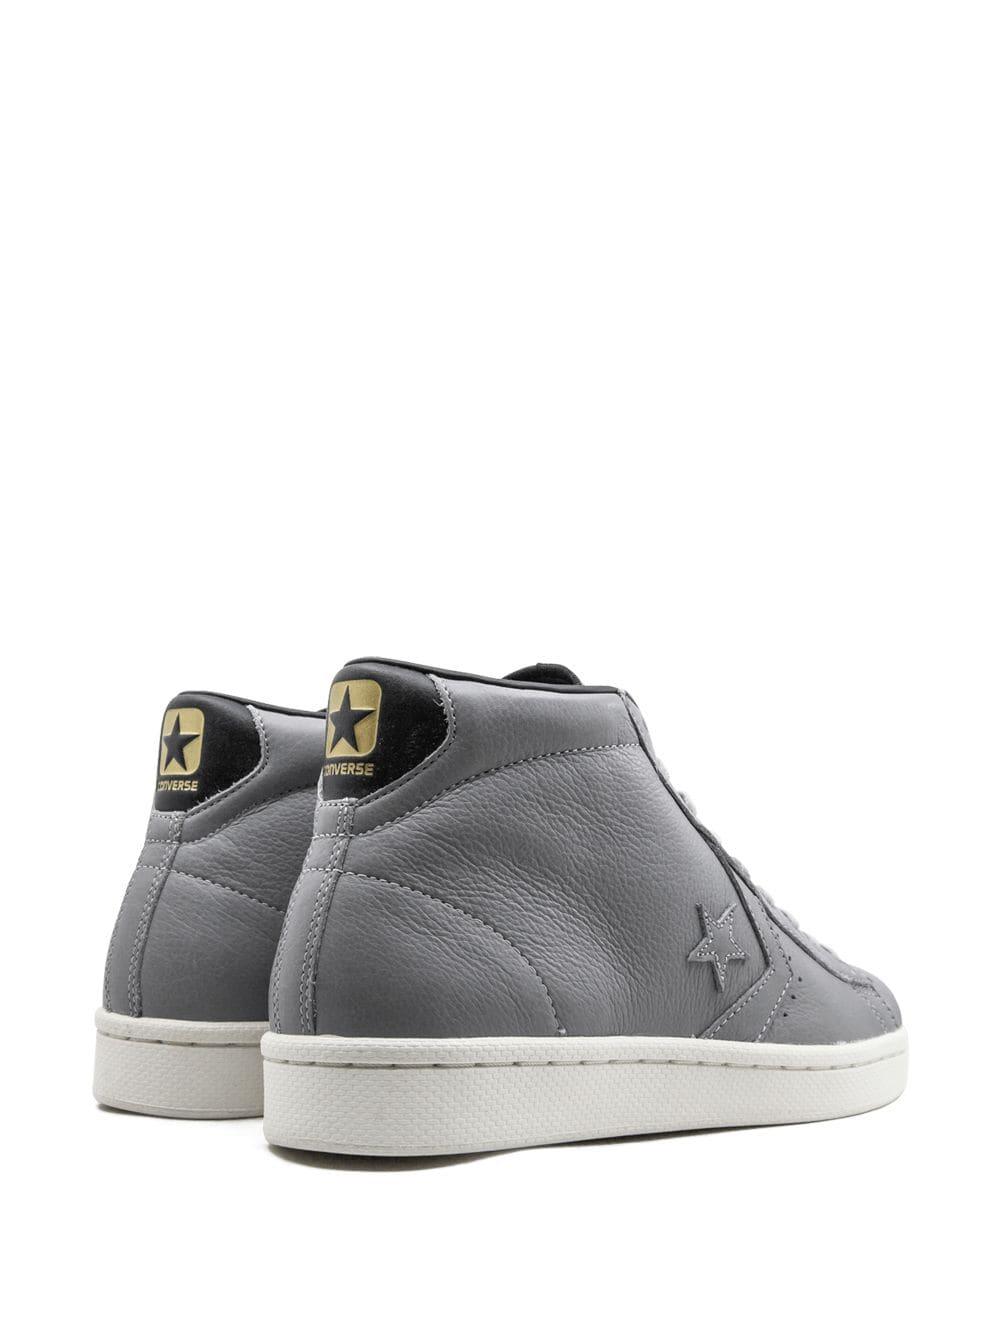 Converse Pro Leather 76 Mid Sneakers in Grey (Gray) for Men | Lyst